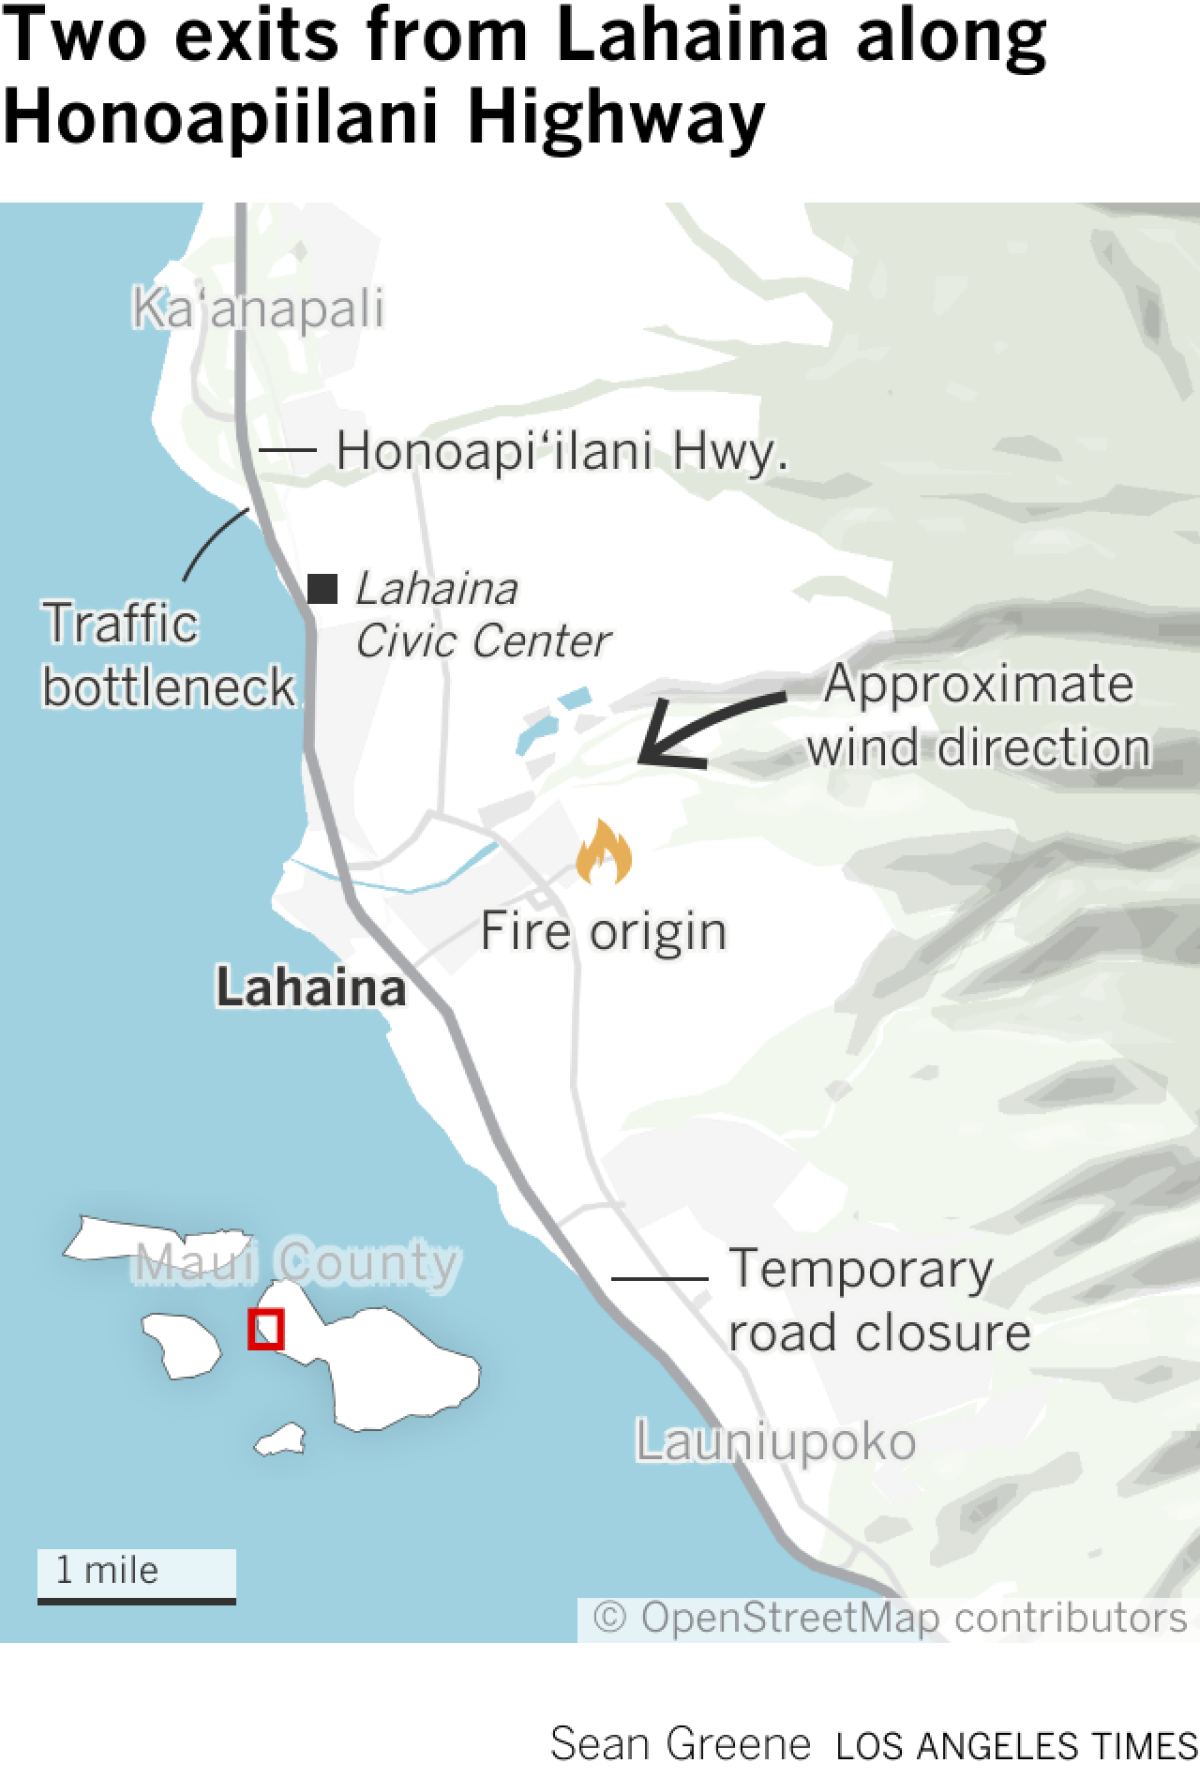 A map of Lahaina shows two exits out of town along Honoapiilani Highway.